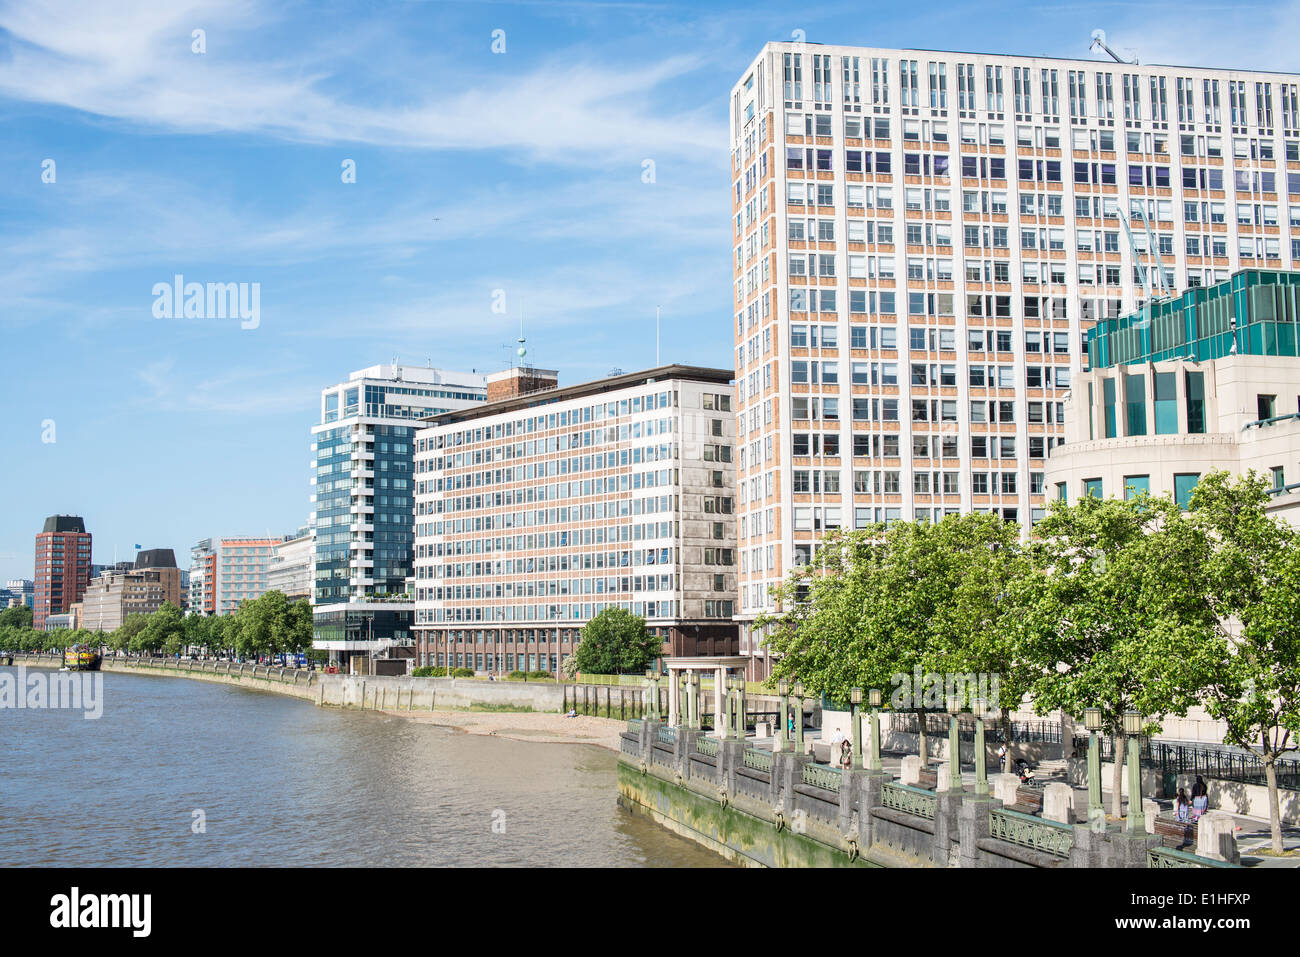 Tower blocks on the Thames, London Stock Photo